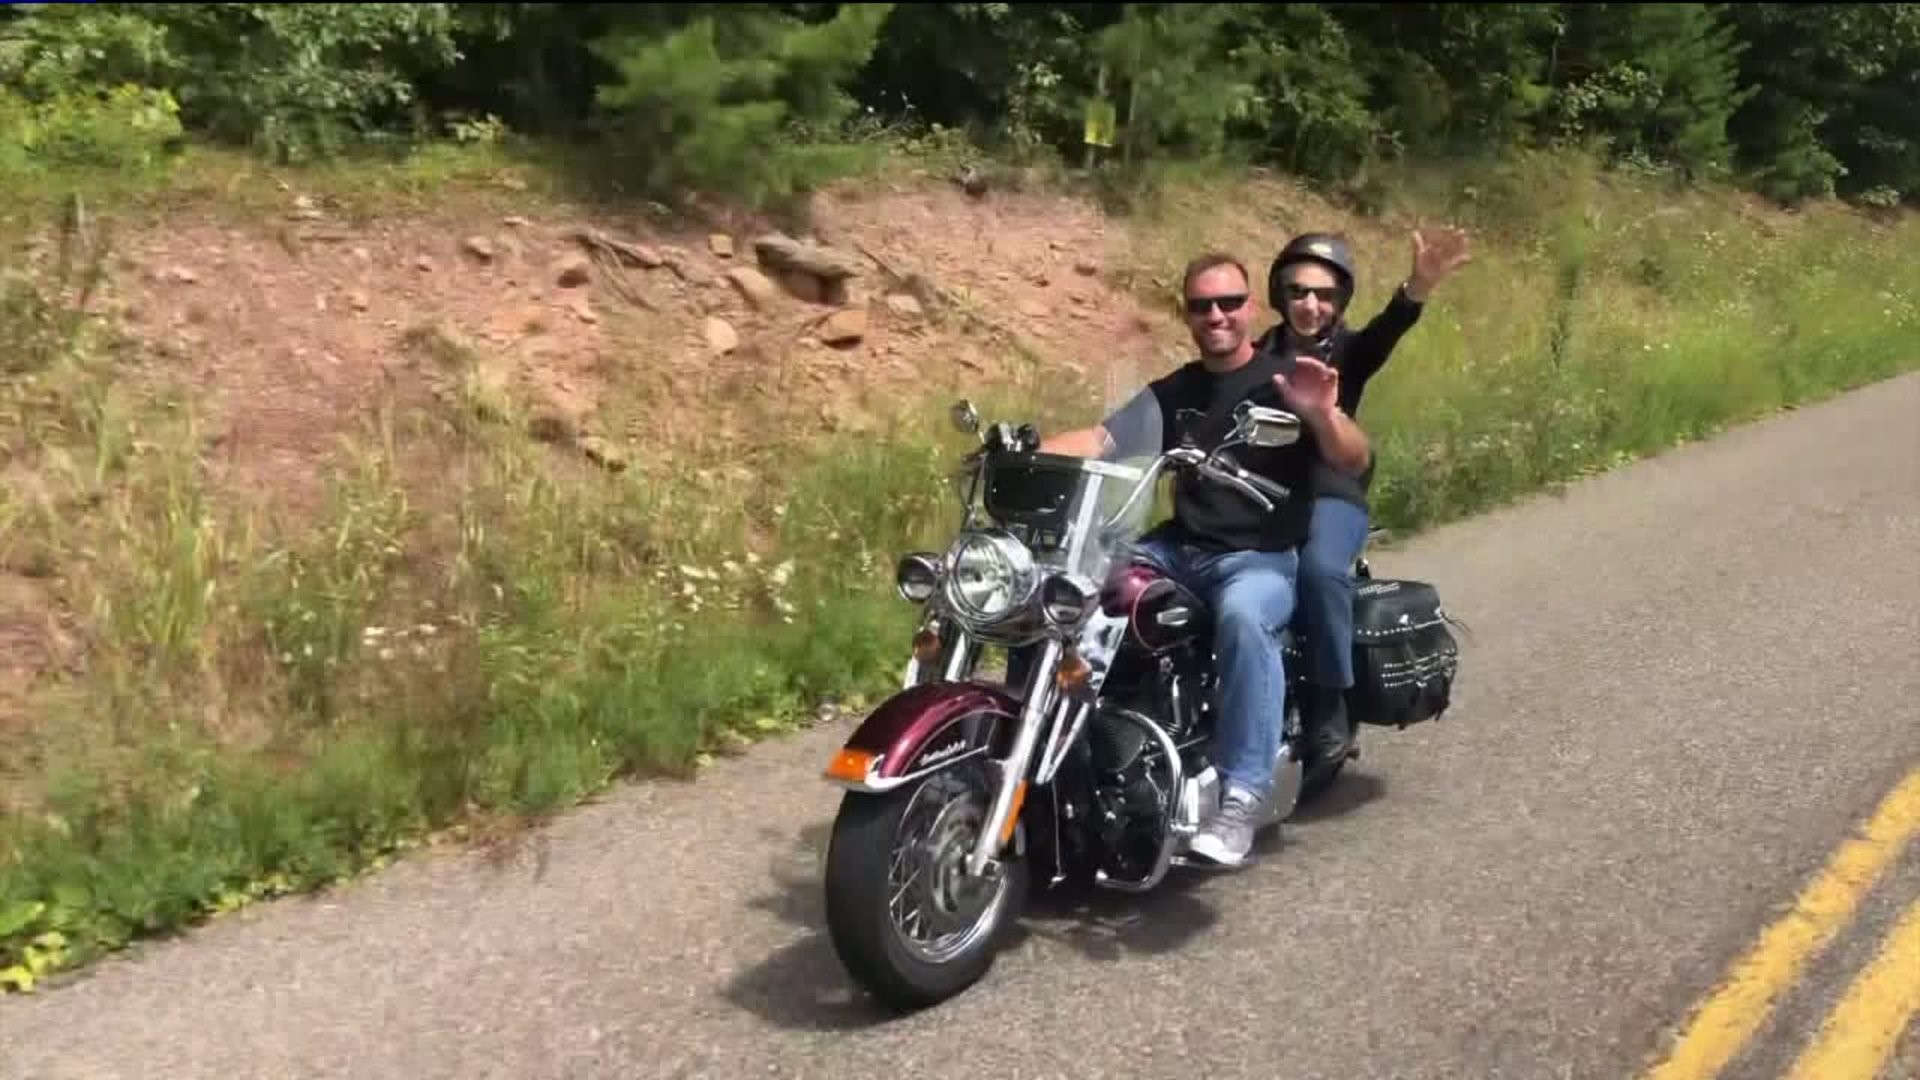 85 Year Old Rewarded with Motorcycle Ride for Beating Cancer